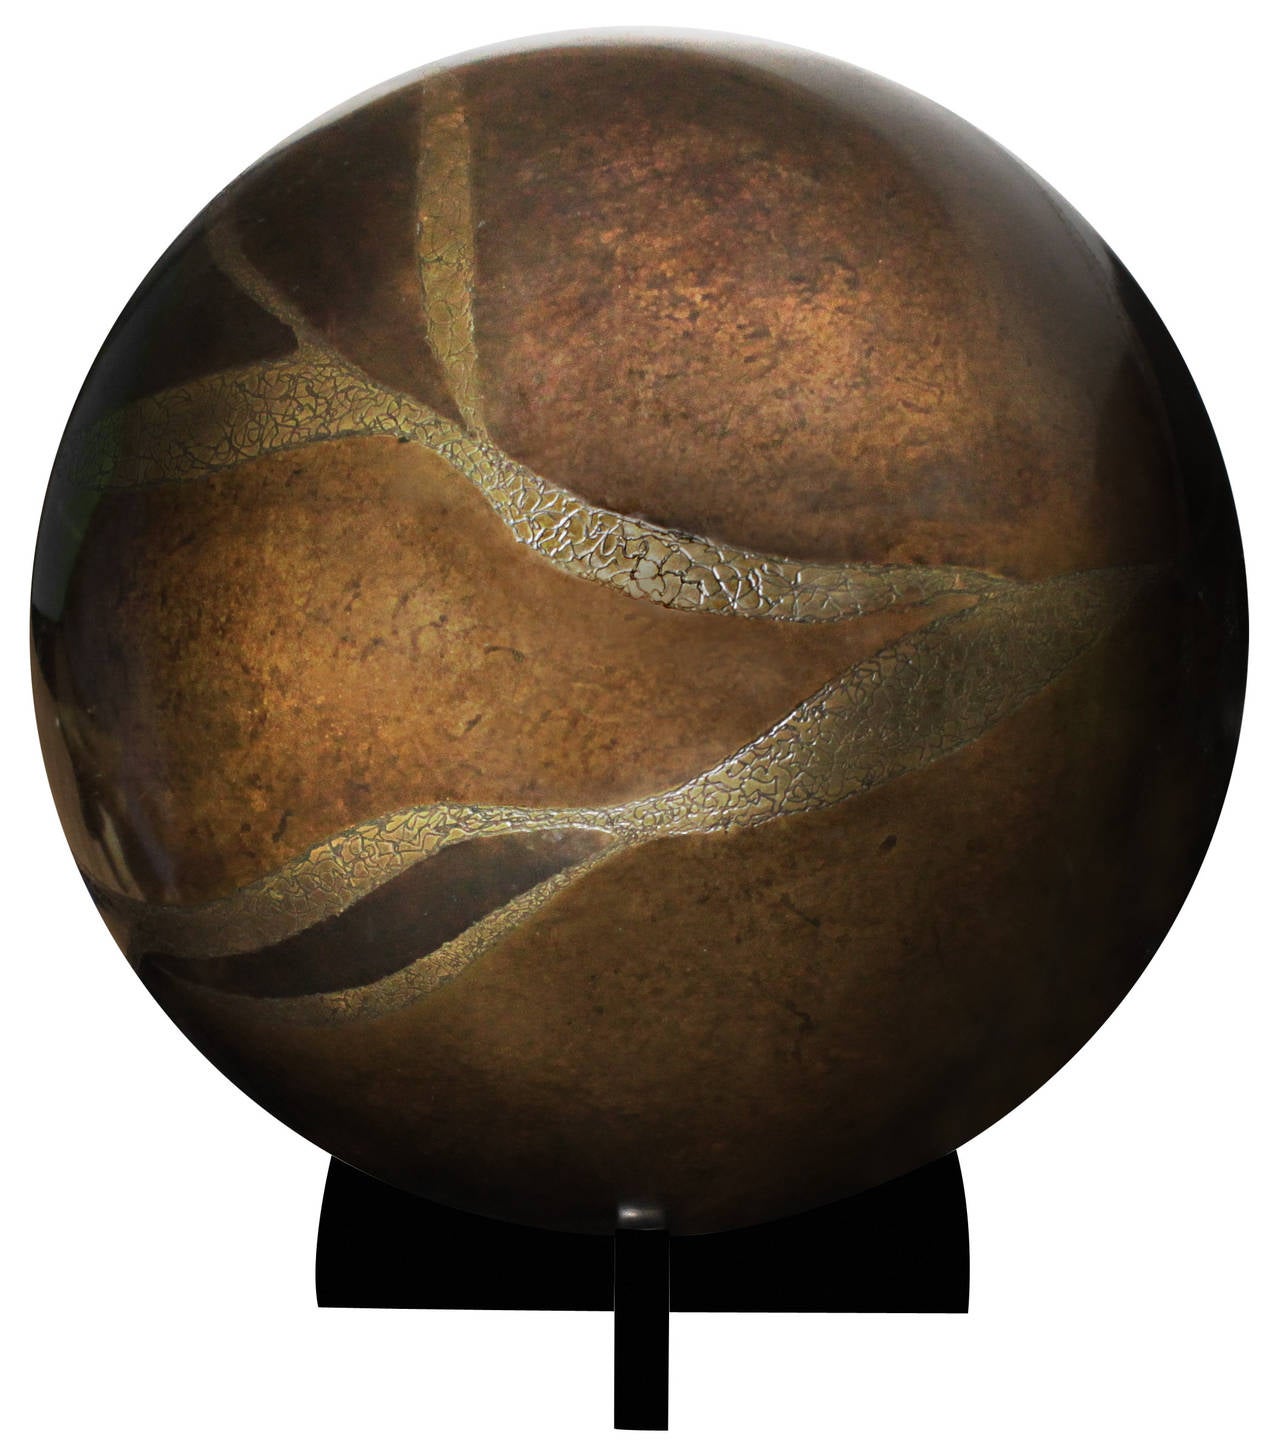 Large bronze orb sculpture with incised textural decoration on wooden stand by Karl Springer, American, 1980s. This is the same type of orb that was used in his table lamps.